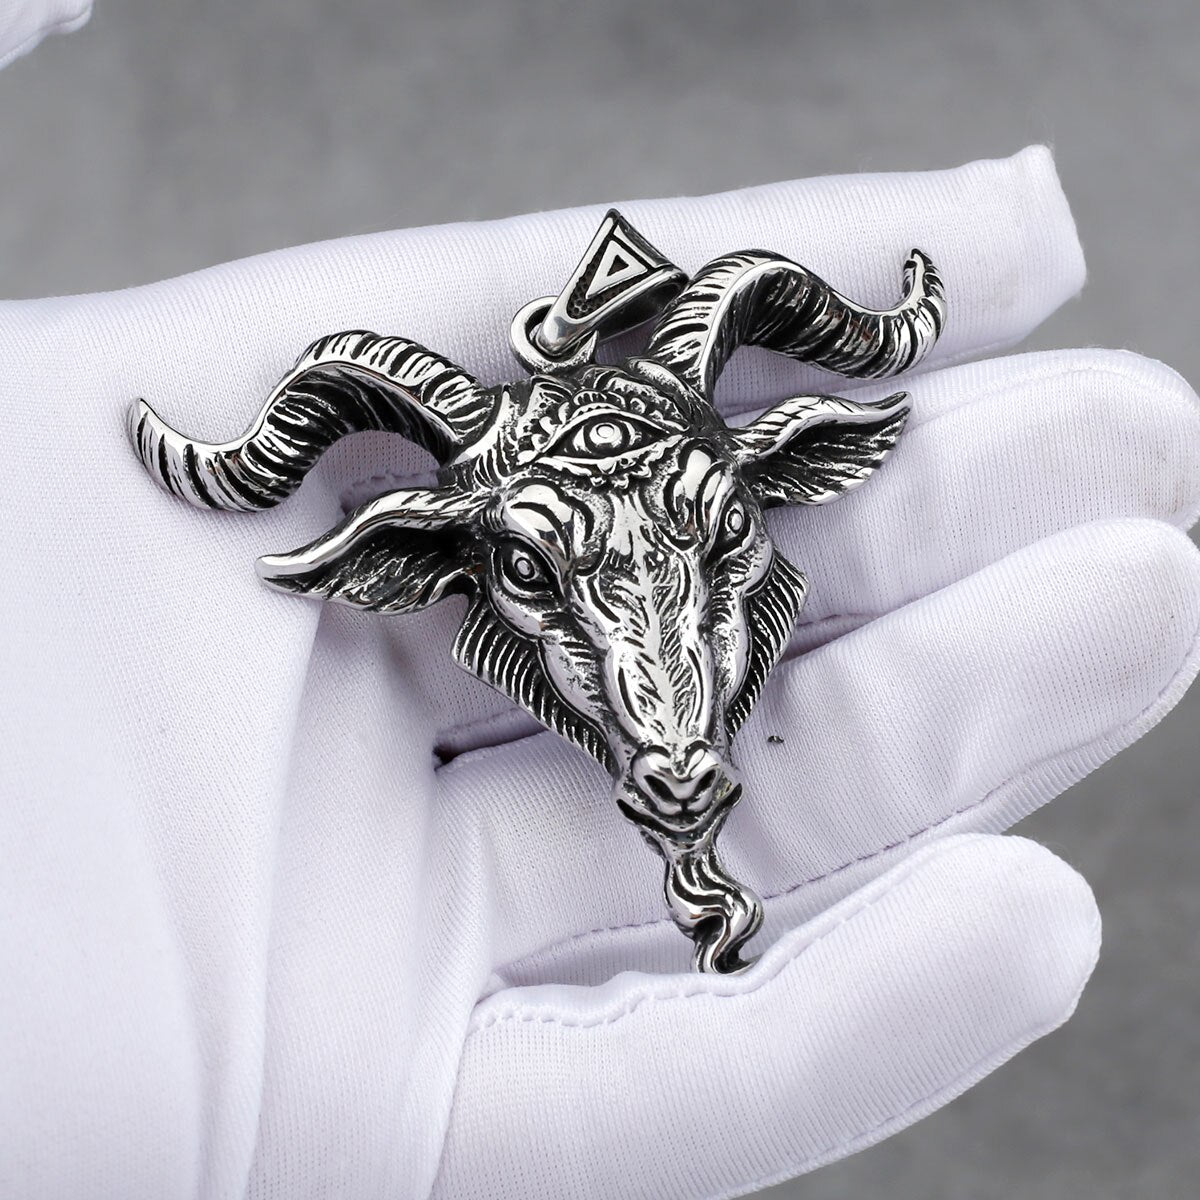 Stainless Steel Viking Necklace